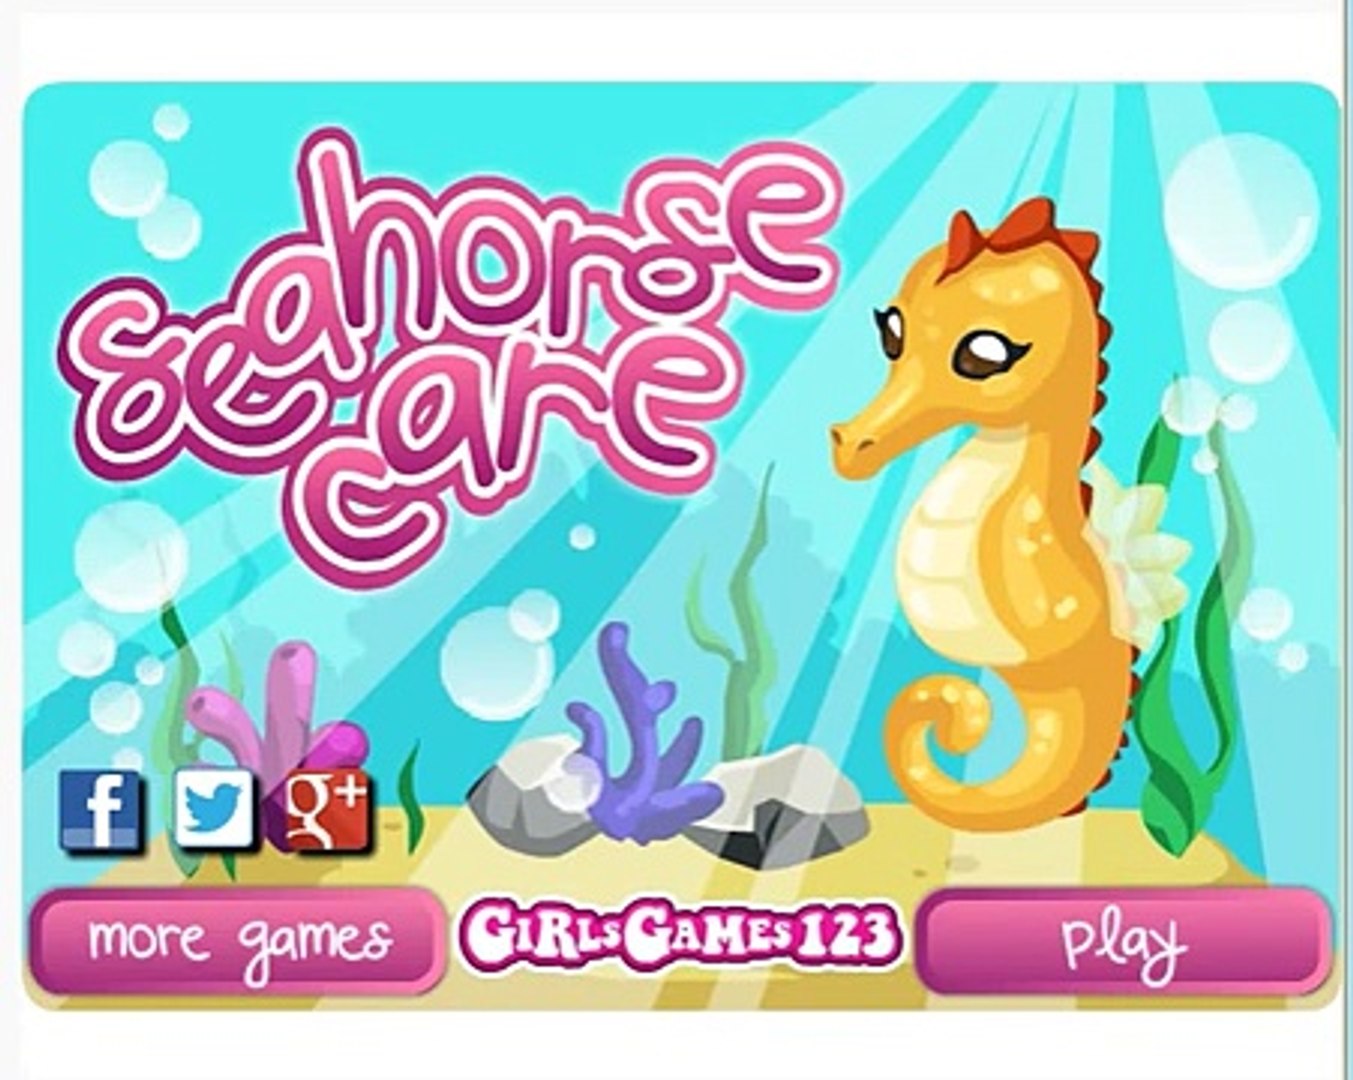 Seahorse Care video-Baby game for sweet fun-caring games